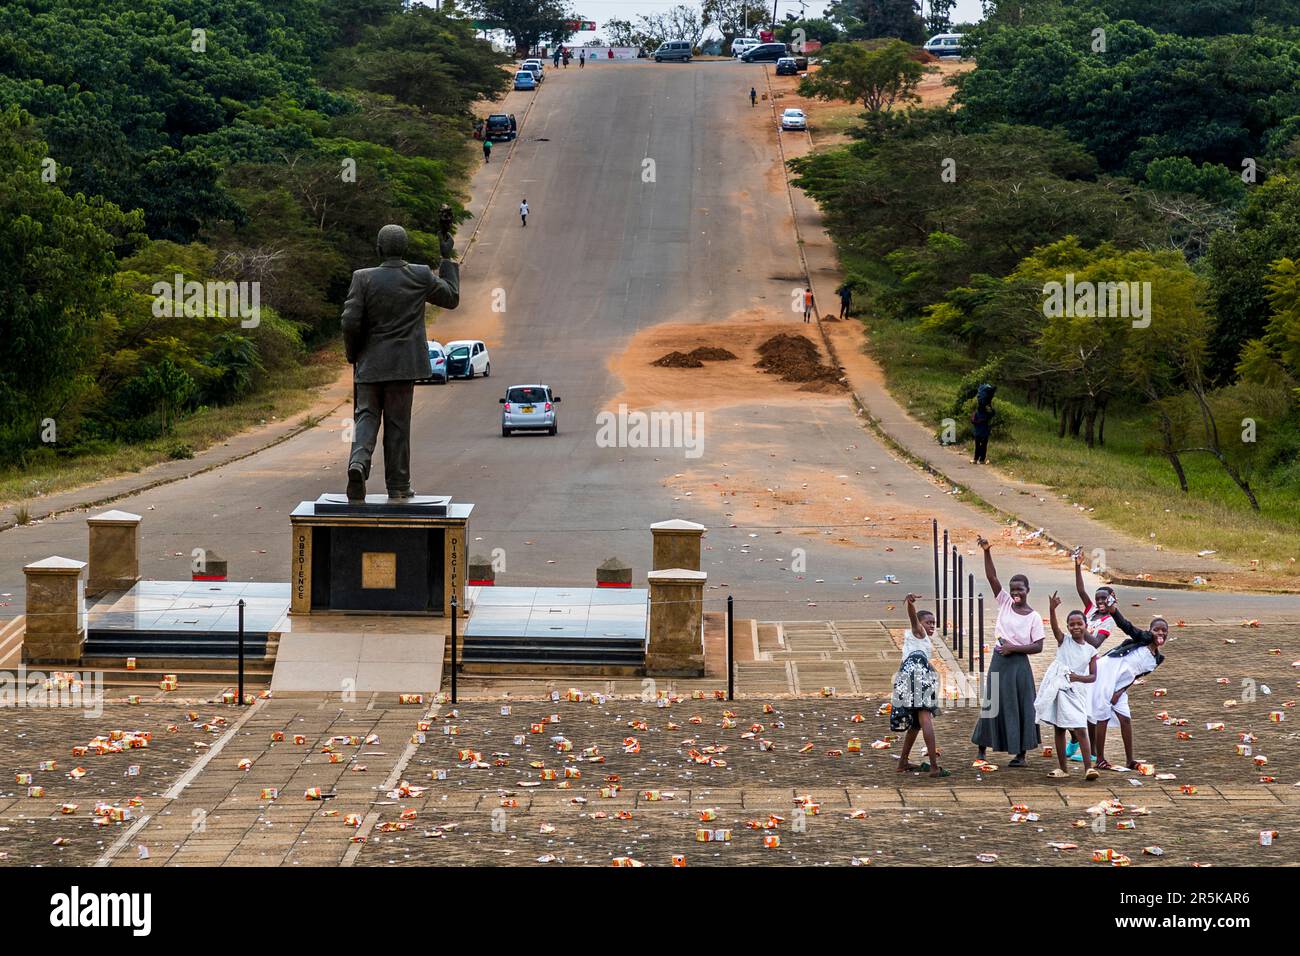 View of Hastings Kamuzu Banda memorial from Memorial War Tower. Girls collect lying plastic parts and wave. Young girls collect the cap rings of the maheu packs discarded on the national holiday in honor of Malawi's first president (Hastings Kamuzu Banda) to make jewelry. Maheu or Mahewu is a typical drink in Malawi made from fermented maize. Lilongwe, Malawi Stock Photo